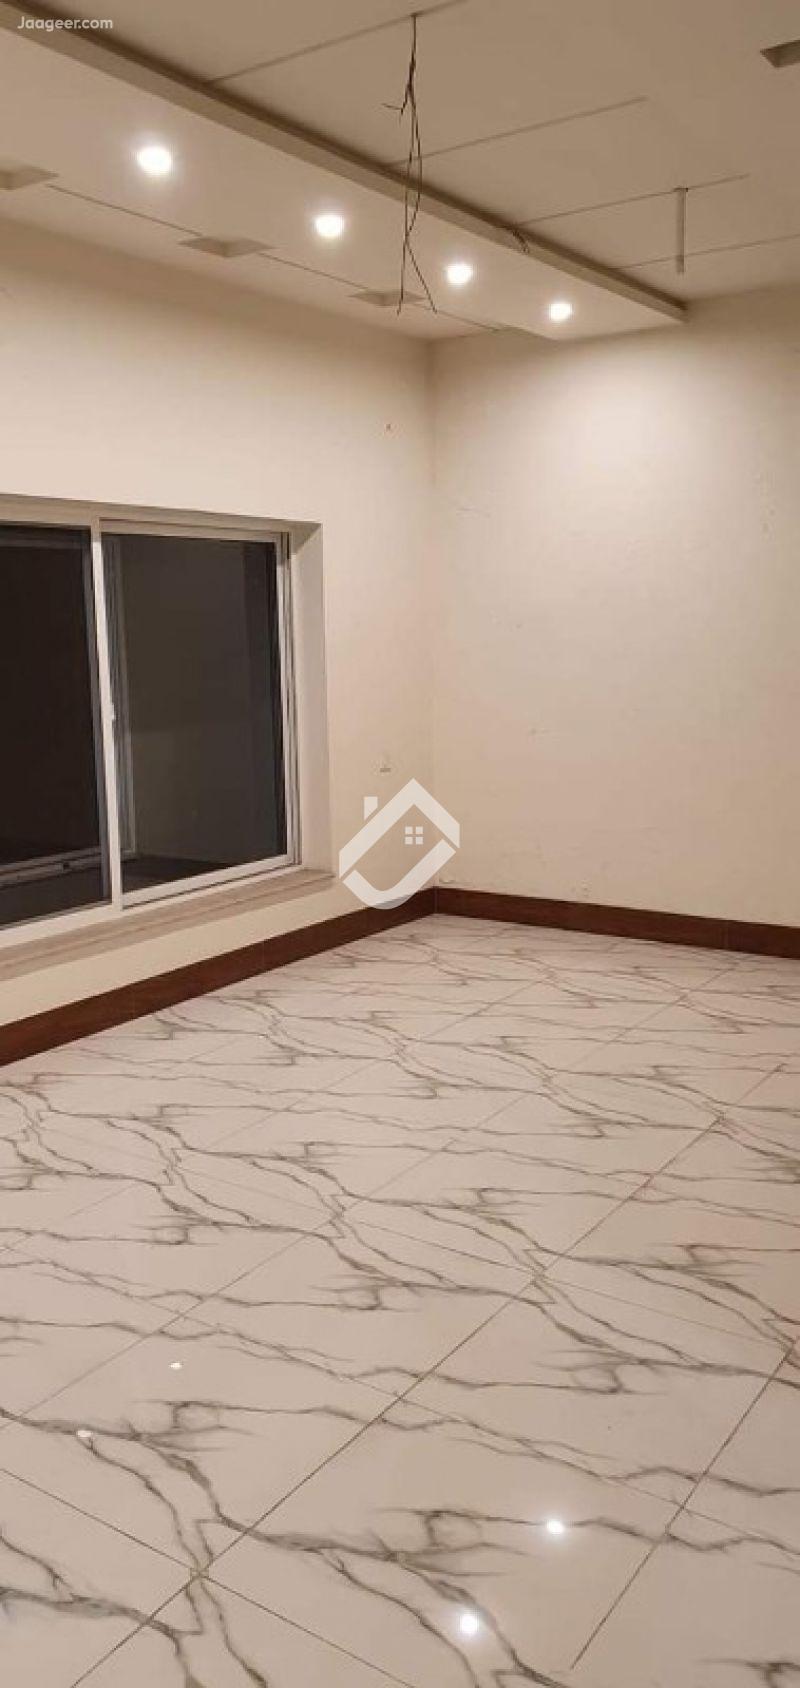 View  3 Marla House Is Available For Rent In Main Samundri Road  in Samundri Road, Faisalabad